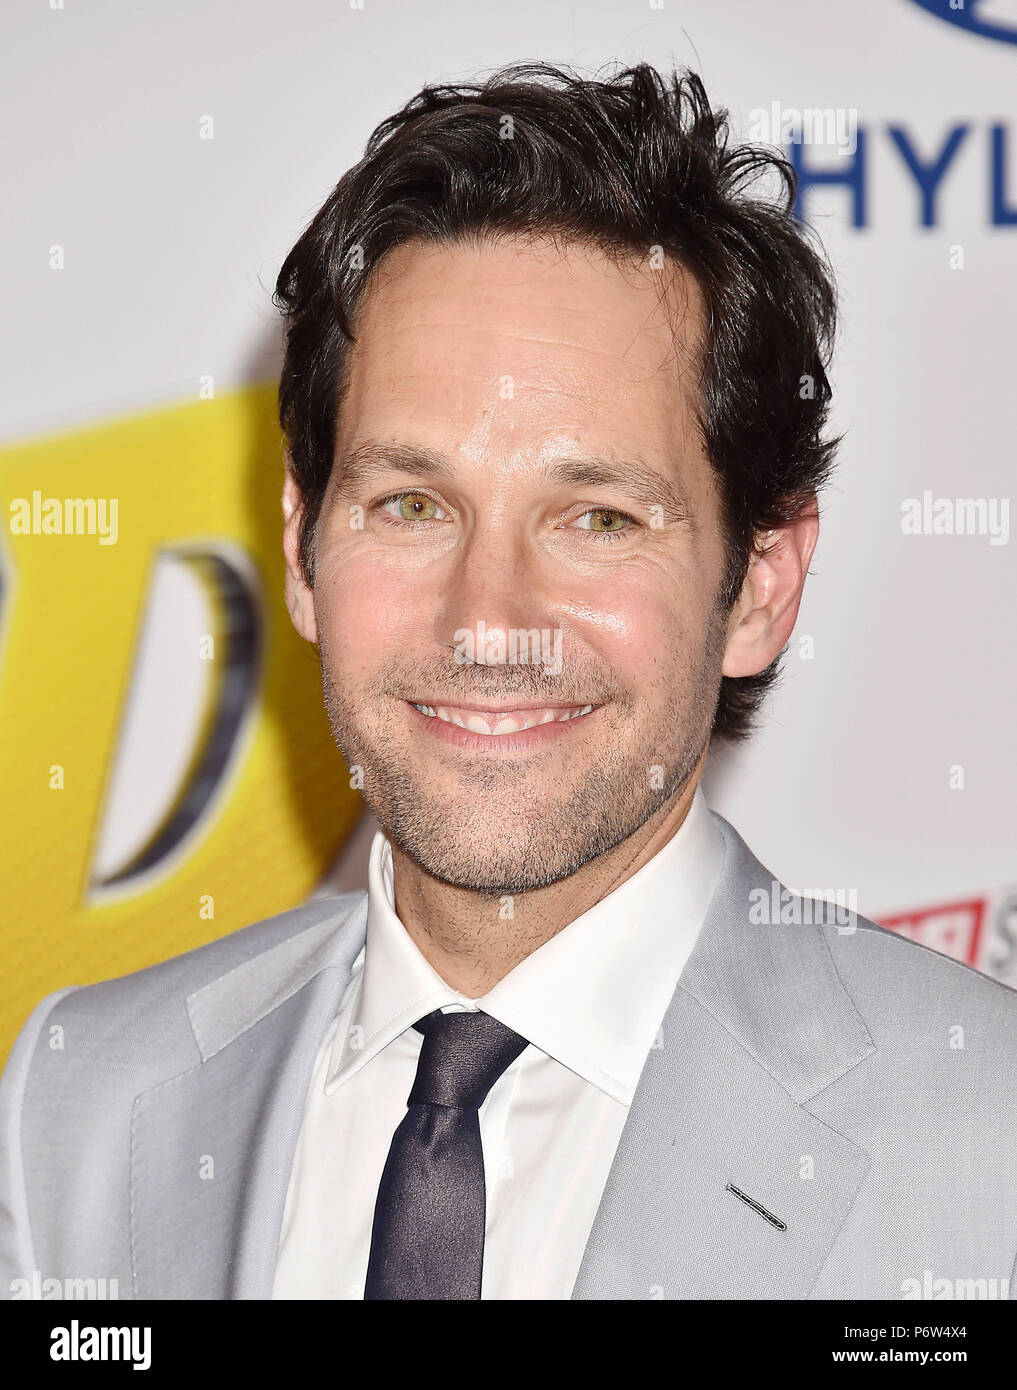 PAUL RUDD American film actor at the Premiere Of Disney And Marvel's 'Ant-Man And The Wasp' at the El Capitan Theatre on June 25, 2018 in Hollywood, California. Photo: Jeffrey Mayer Stock Photo